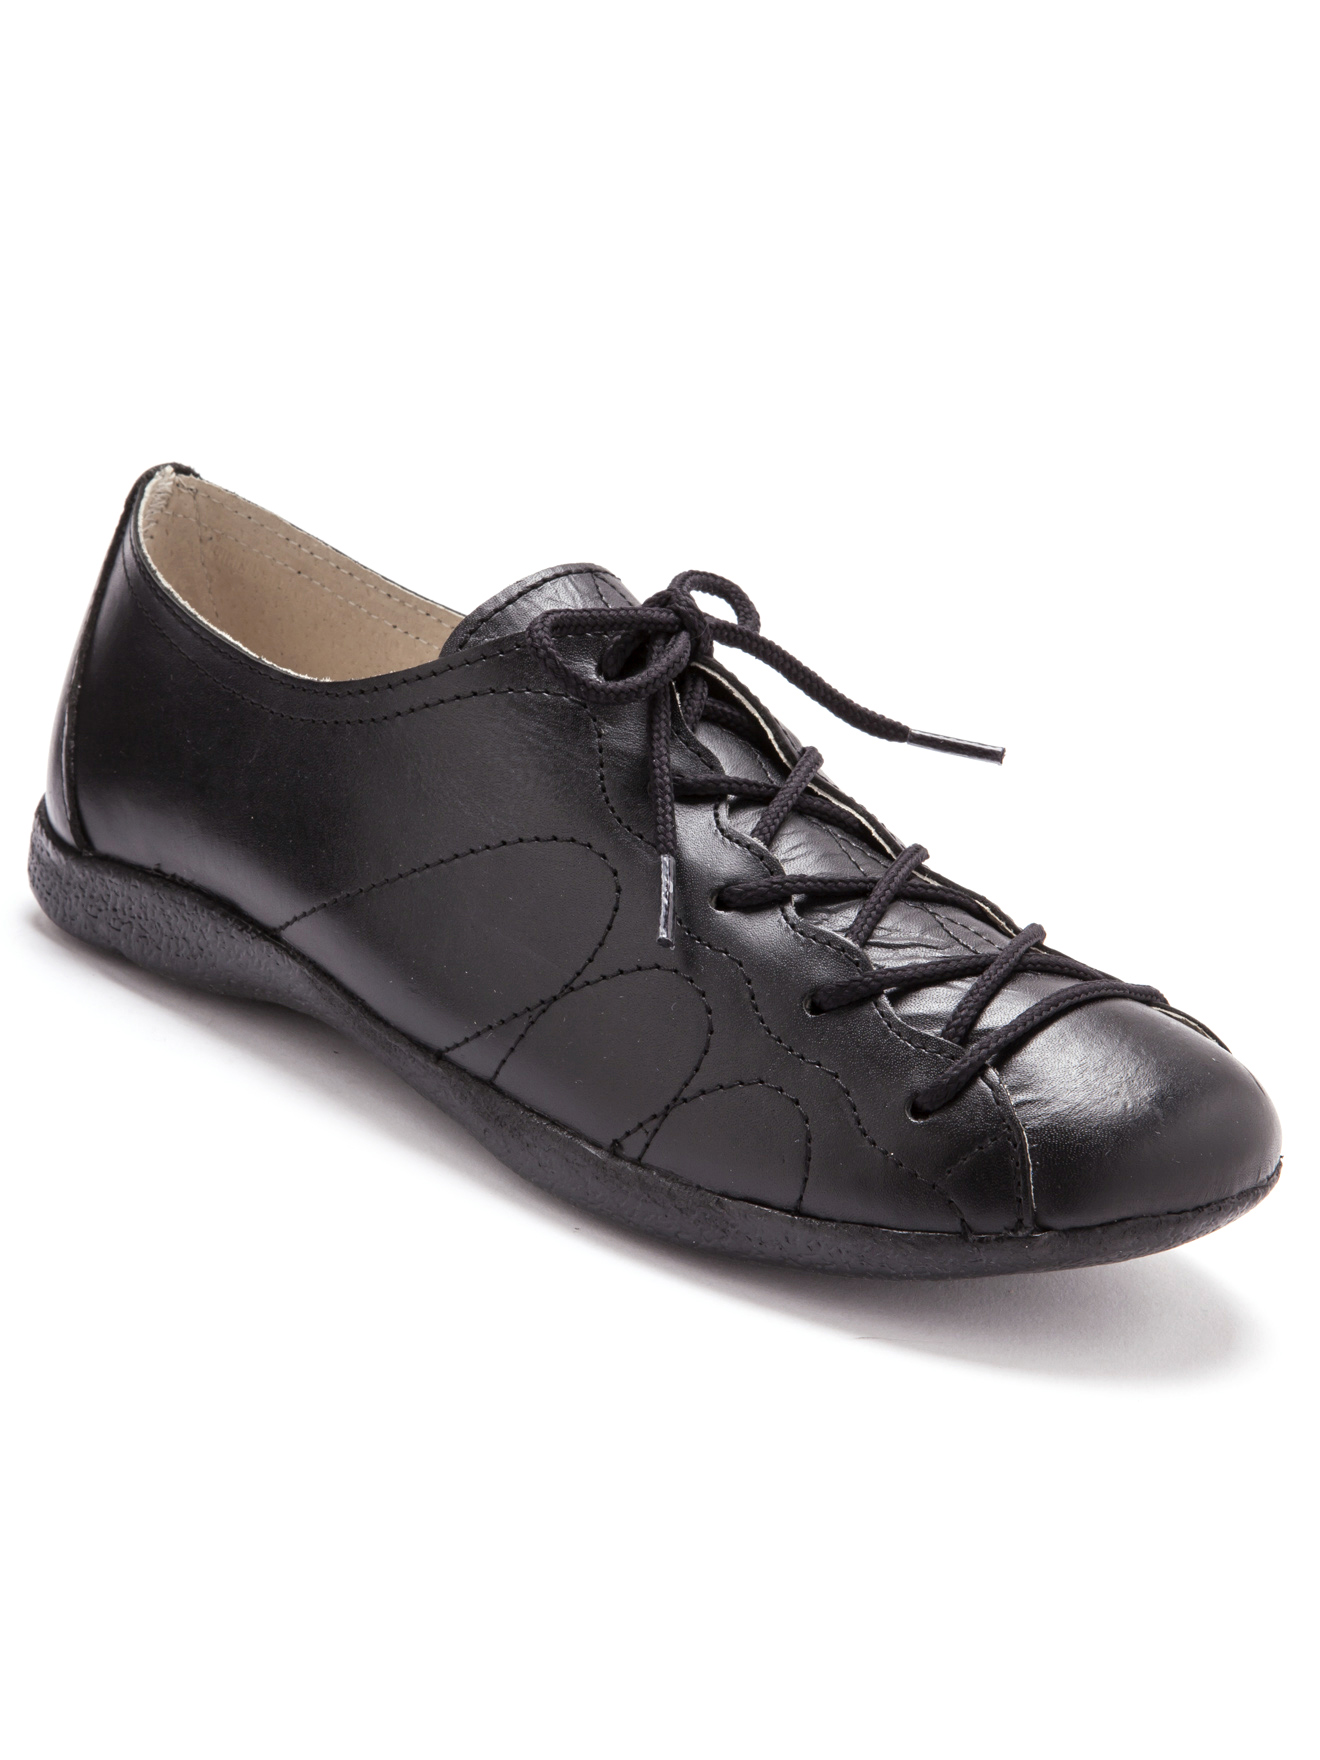 chaussures extra larges pieds sensibles homme - Soldes magasin online ...